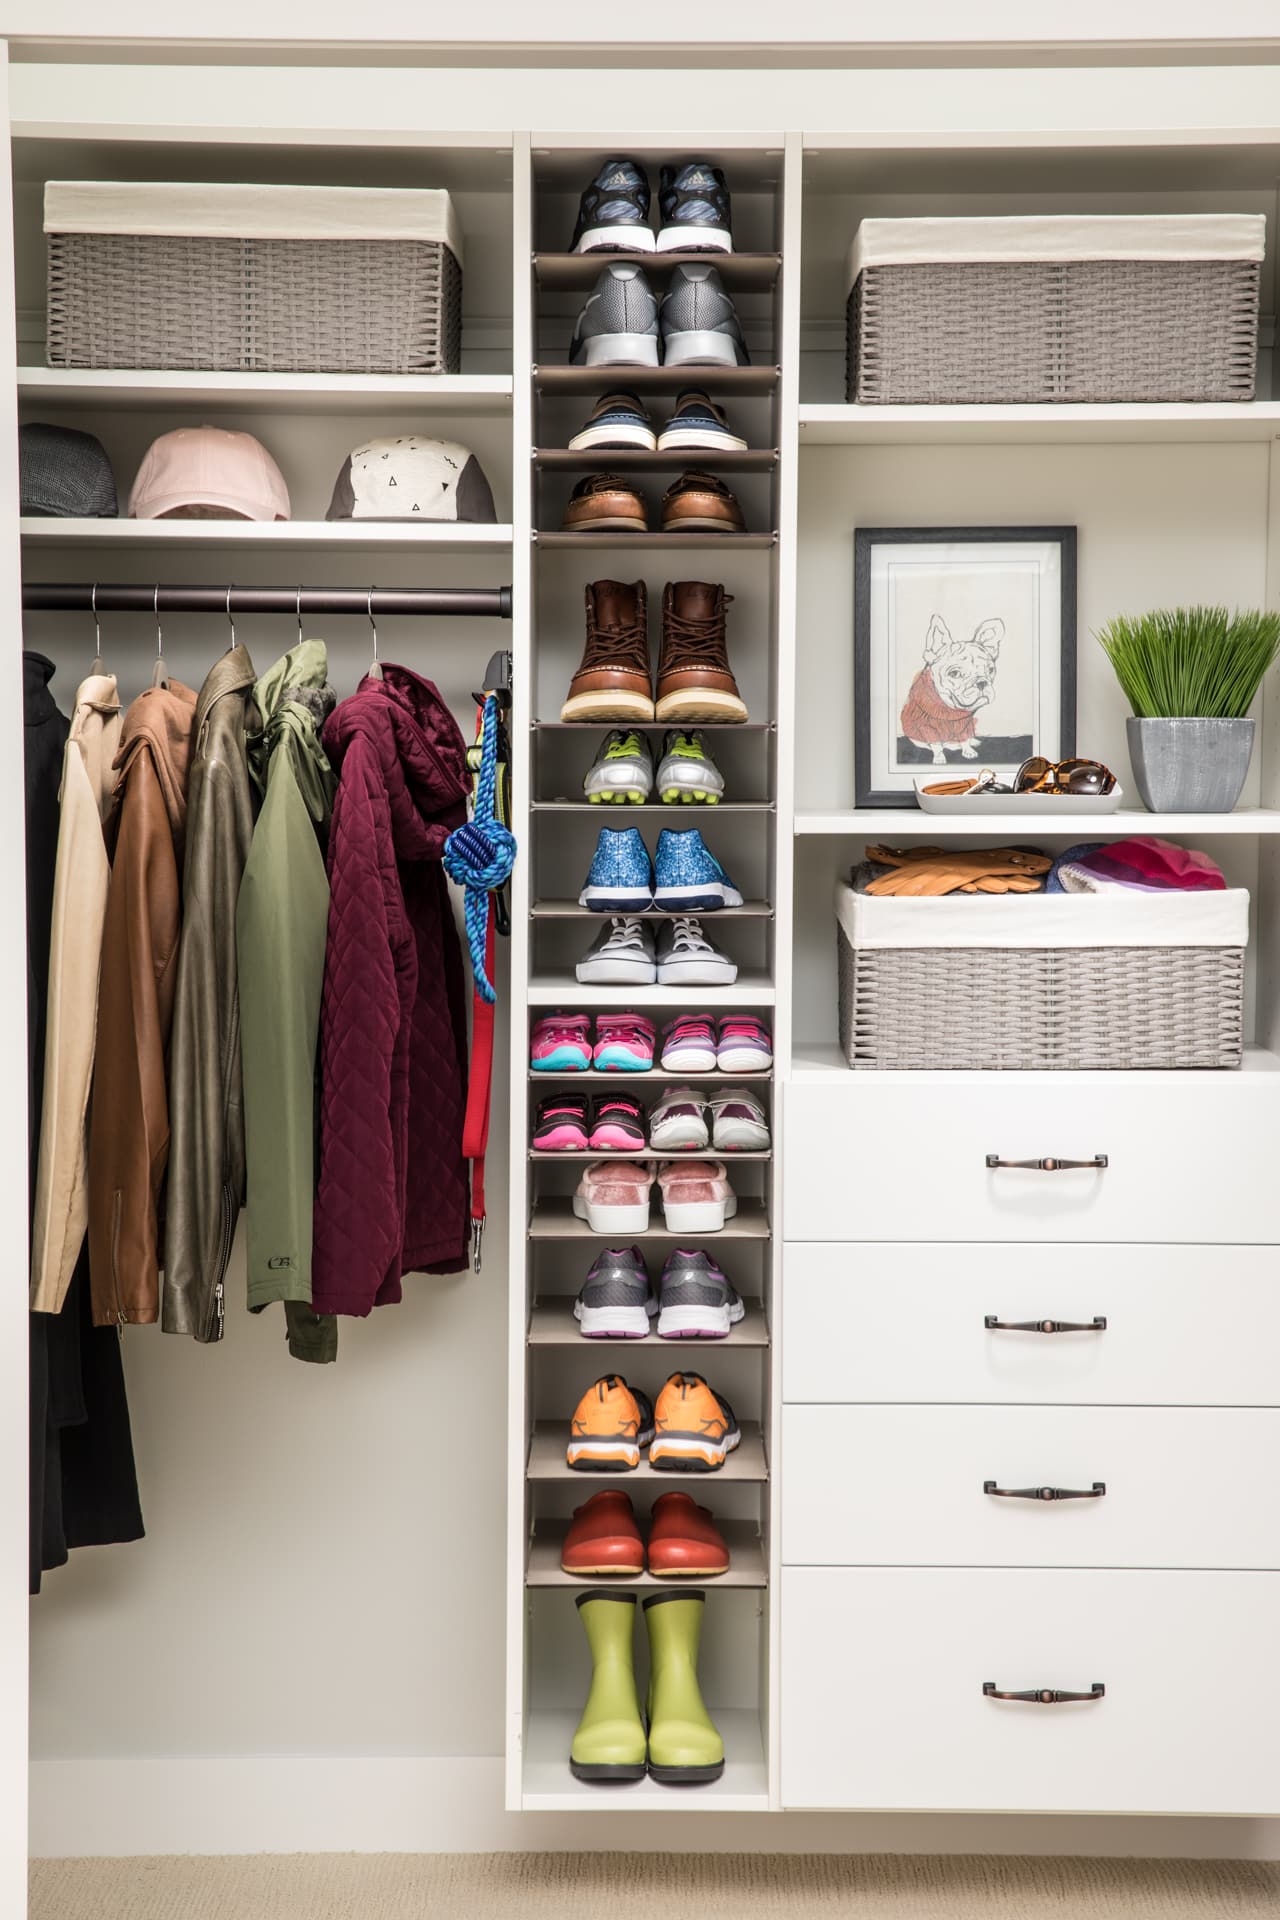 Shoe shrine entryway with shoe shelves, clothing rack, drawers and shelves for other articles